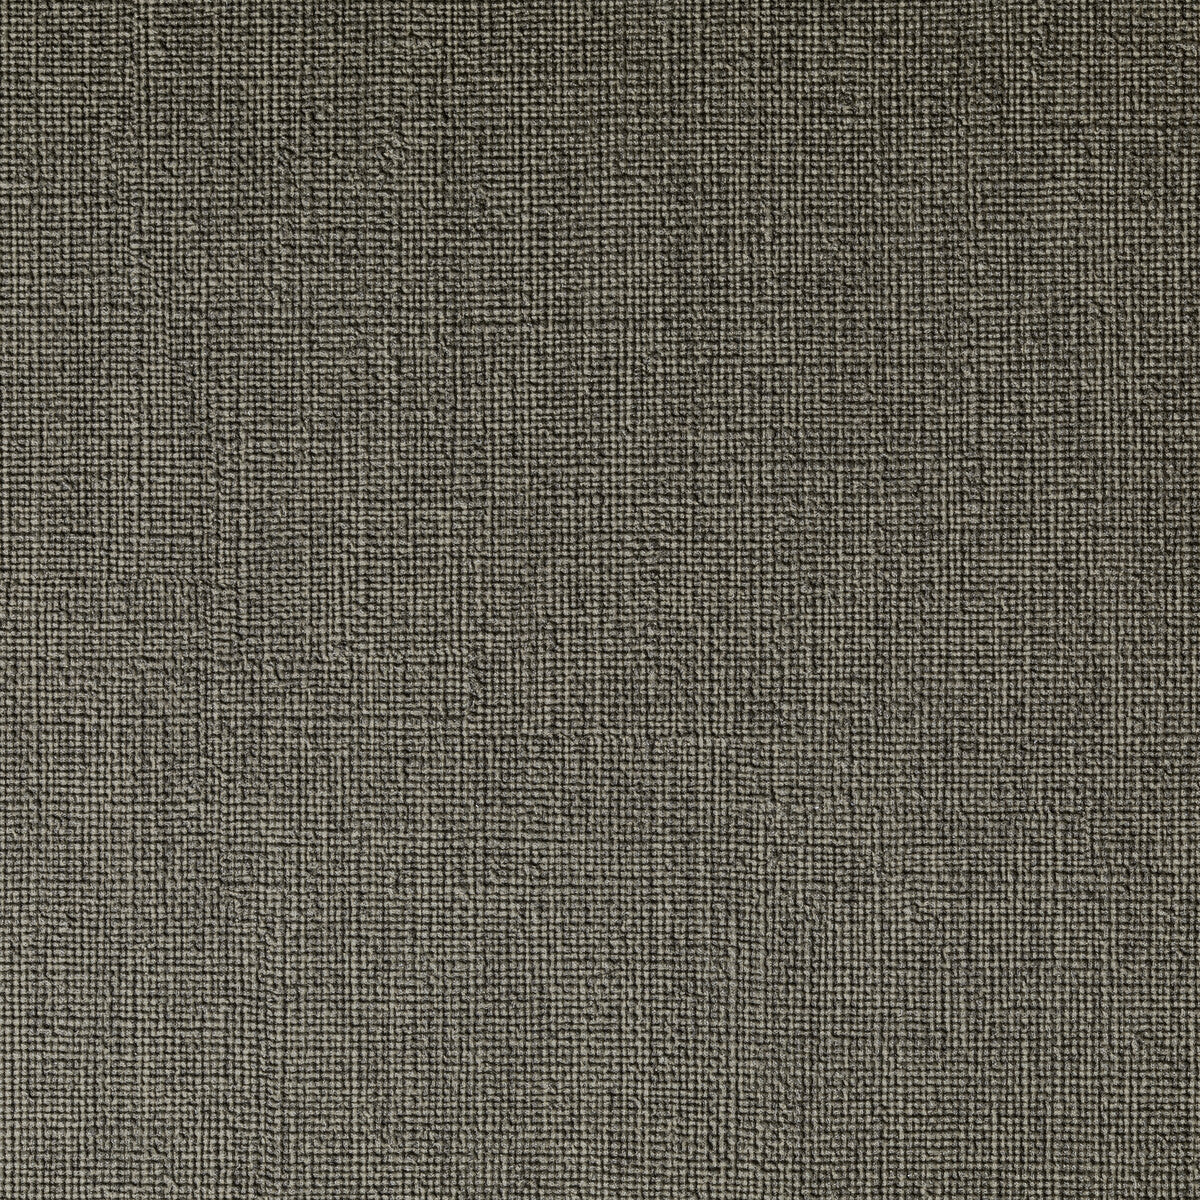 Caslin fabric in bark color - pattern CASLIN.6.0 - by Kravet Contract in the Foundations / Value collection